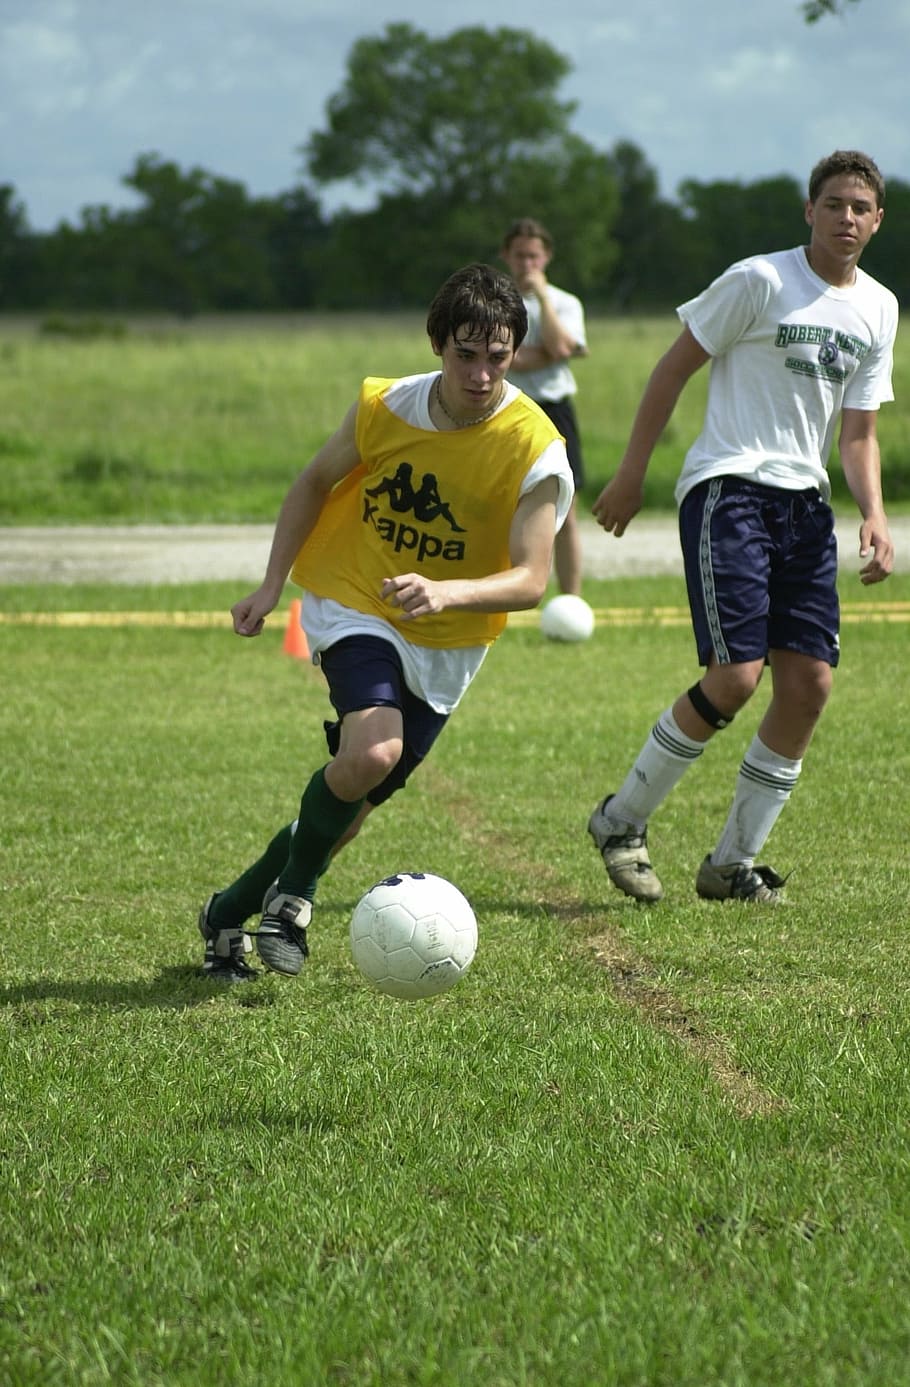 soccer, scrimmage, boys, players, males, athletes, game, play, fun, score